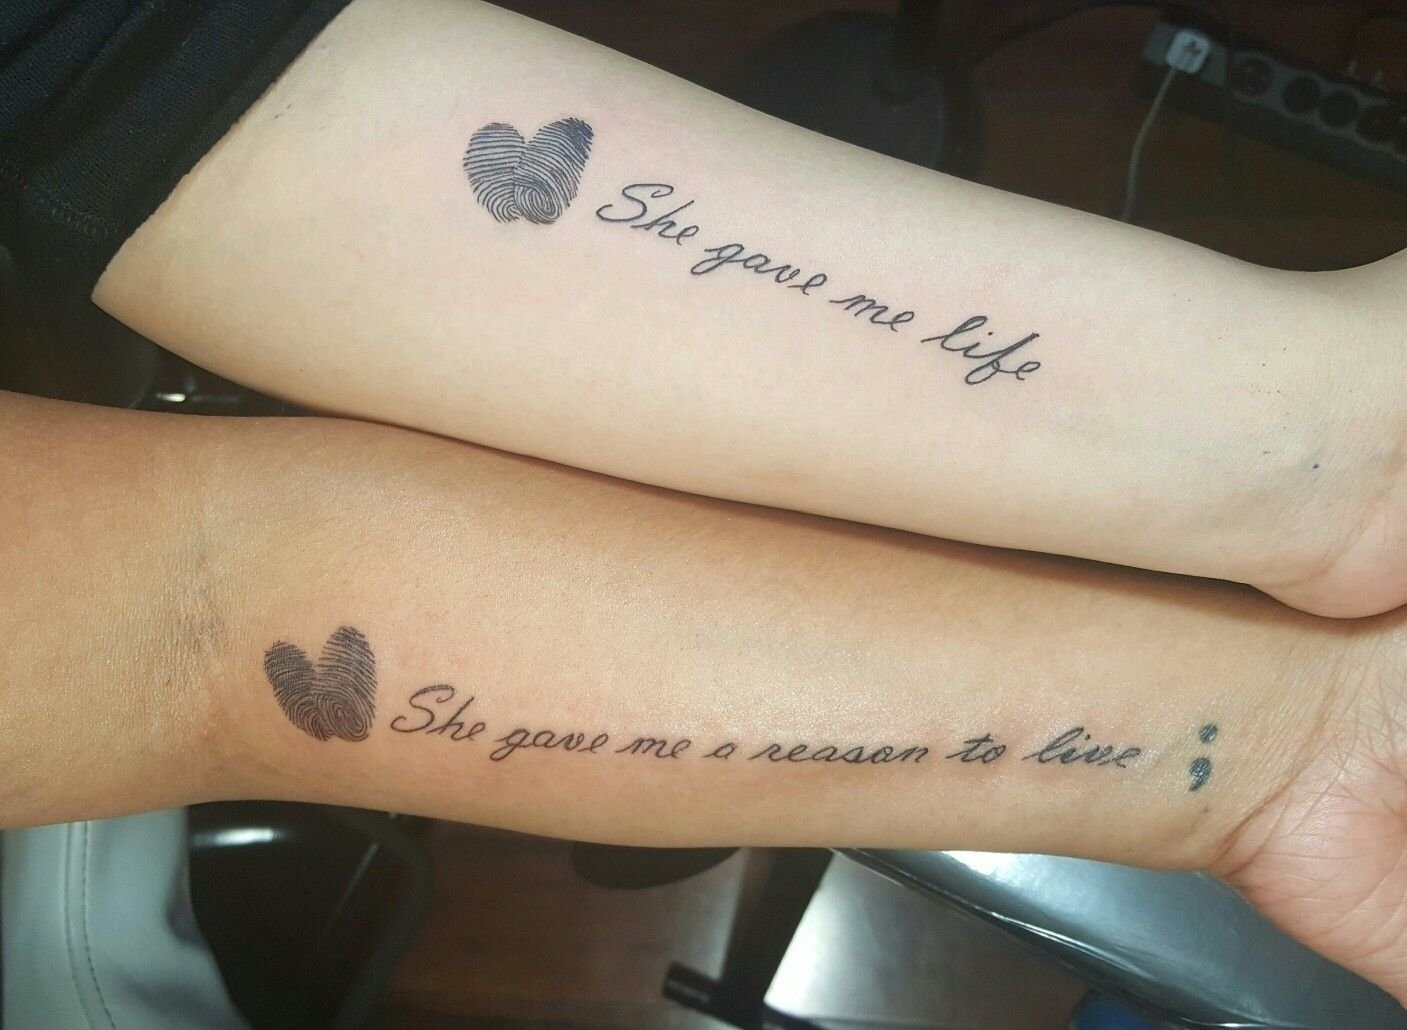 10 Lovable Mom And Daughter Tattoo Ideas mother daughter tattoos tattoos pinterest daughter tattoos 1 2022